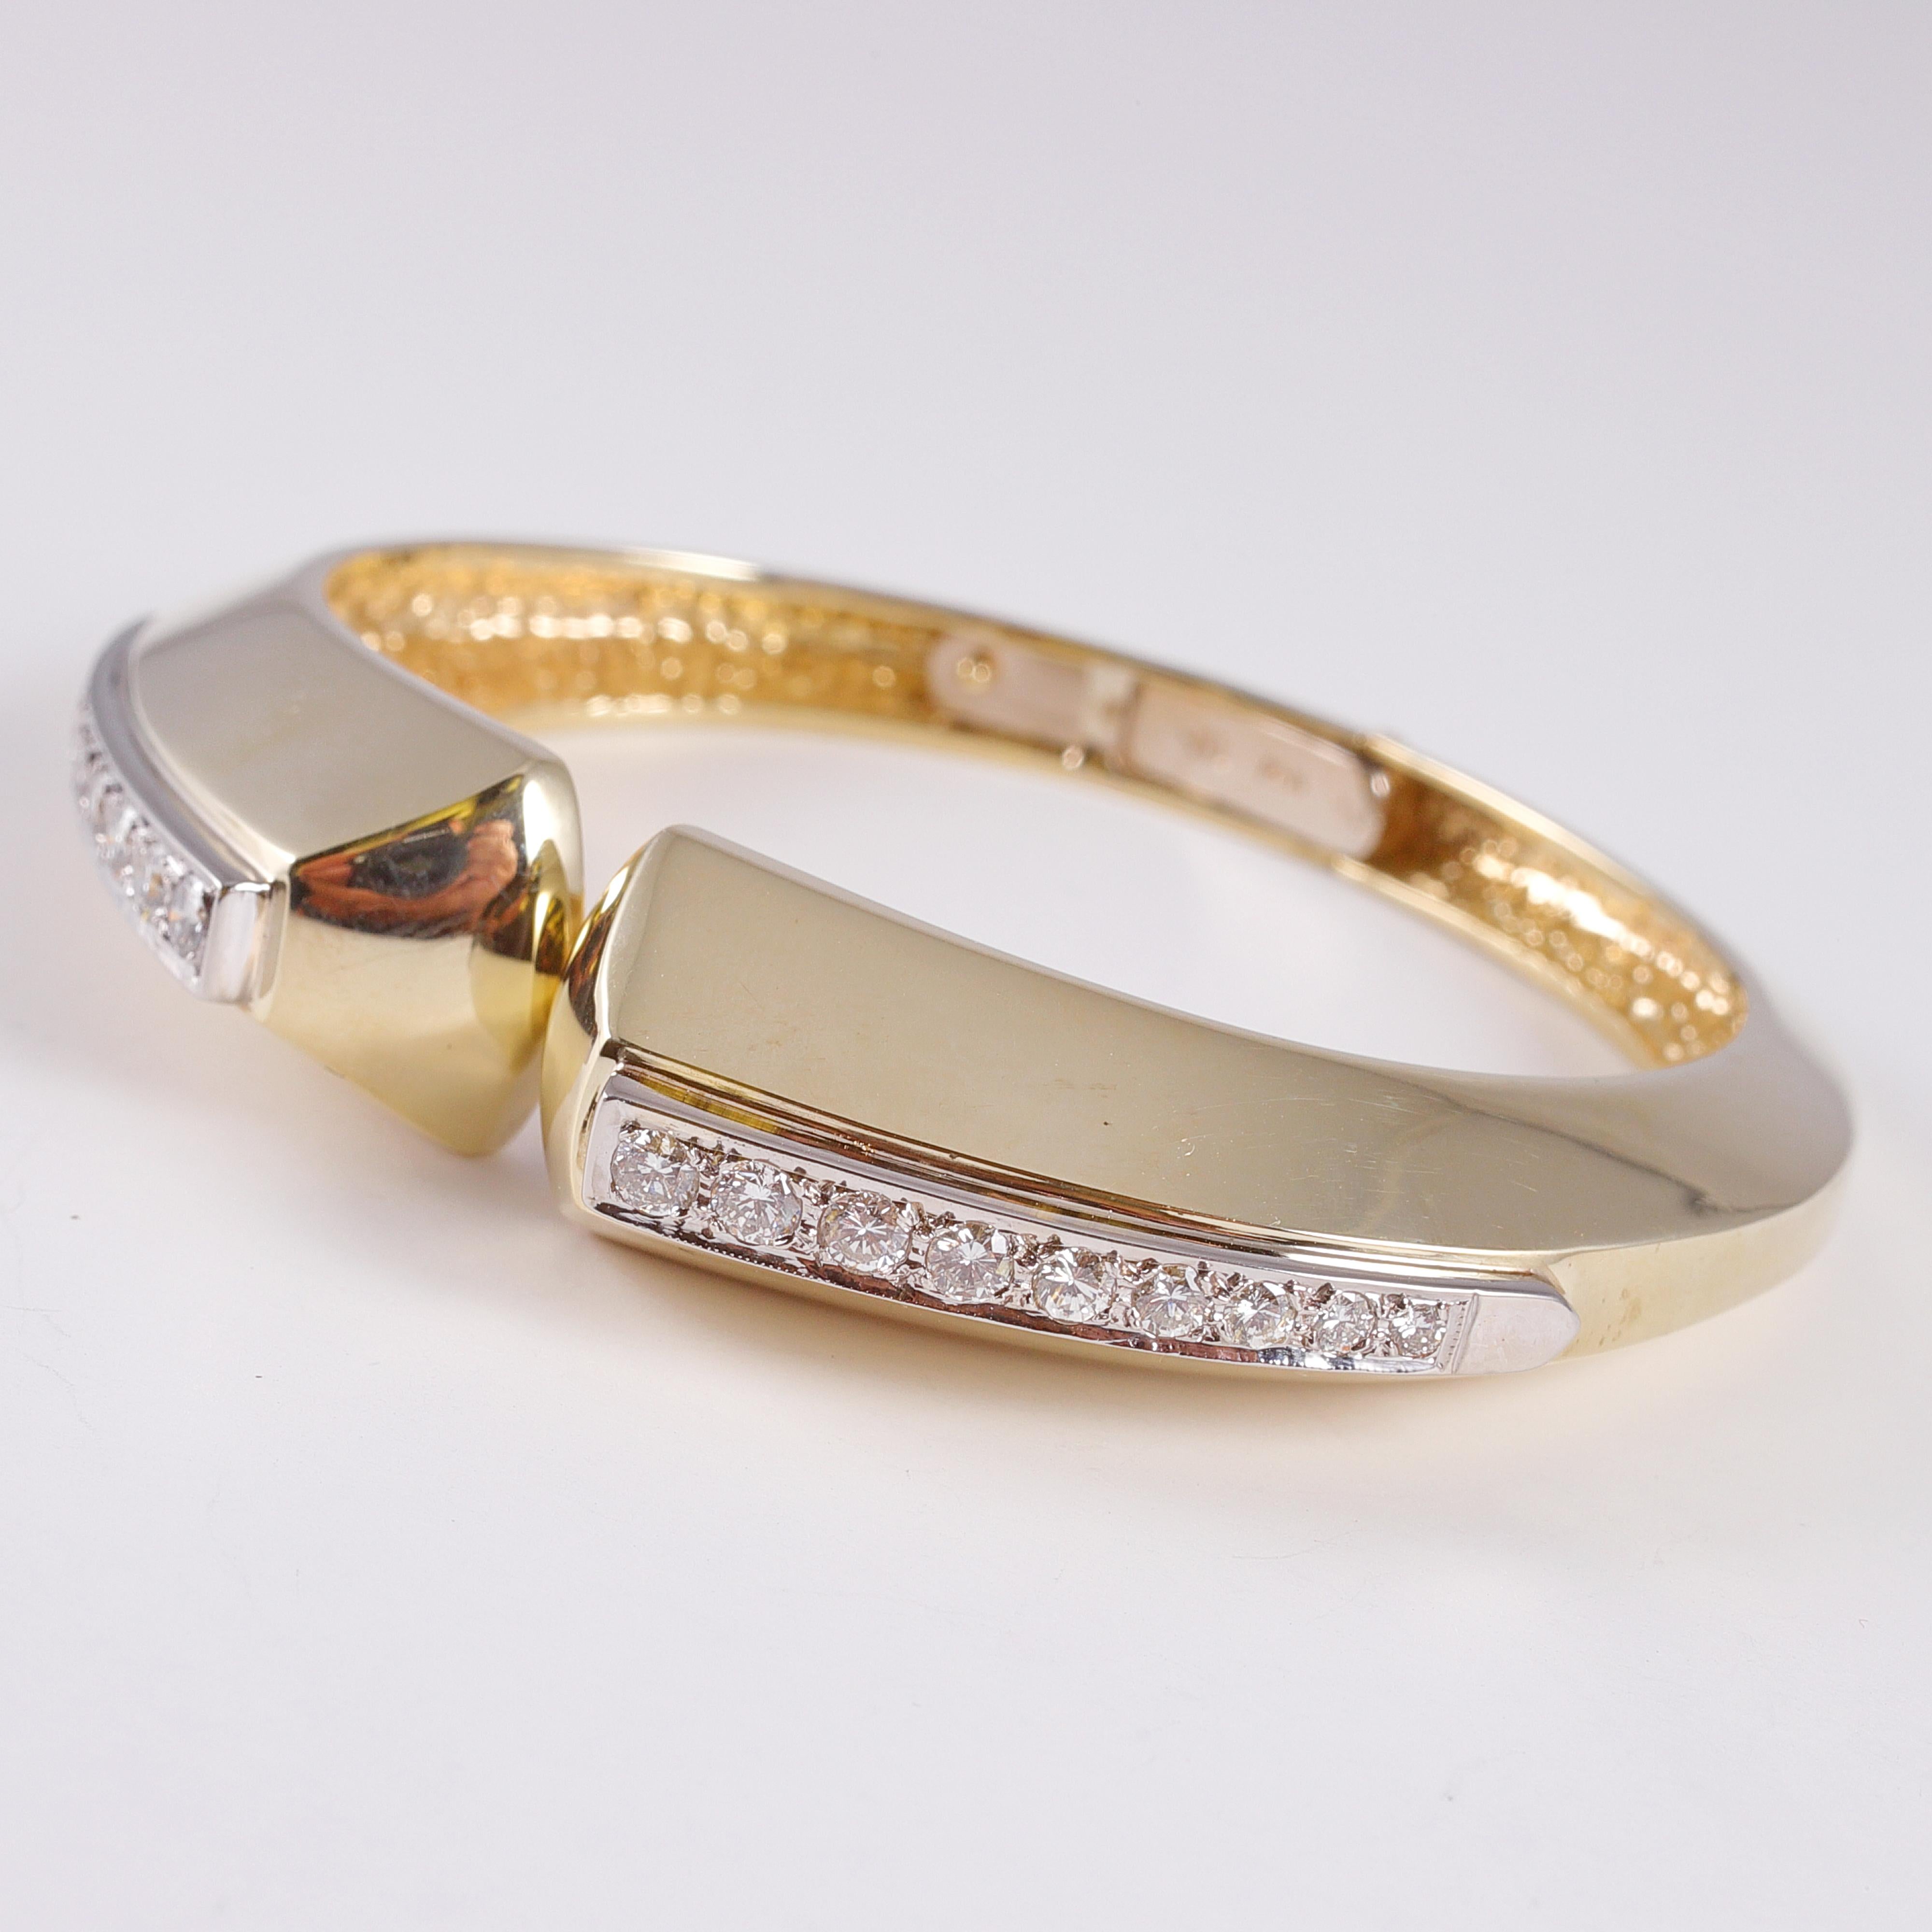 Two toned 14 karat gold hinged cuff bracelet with 1.20 carats of diamonds and polished gold.  This beauty is engraved 